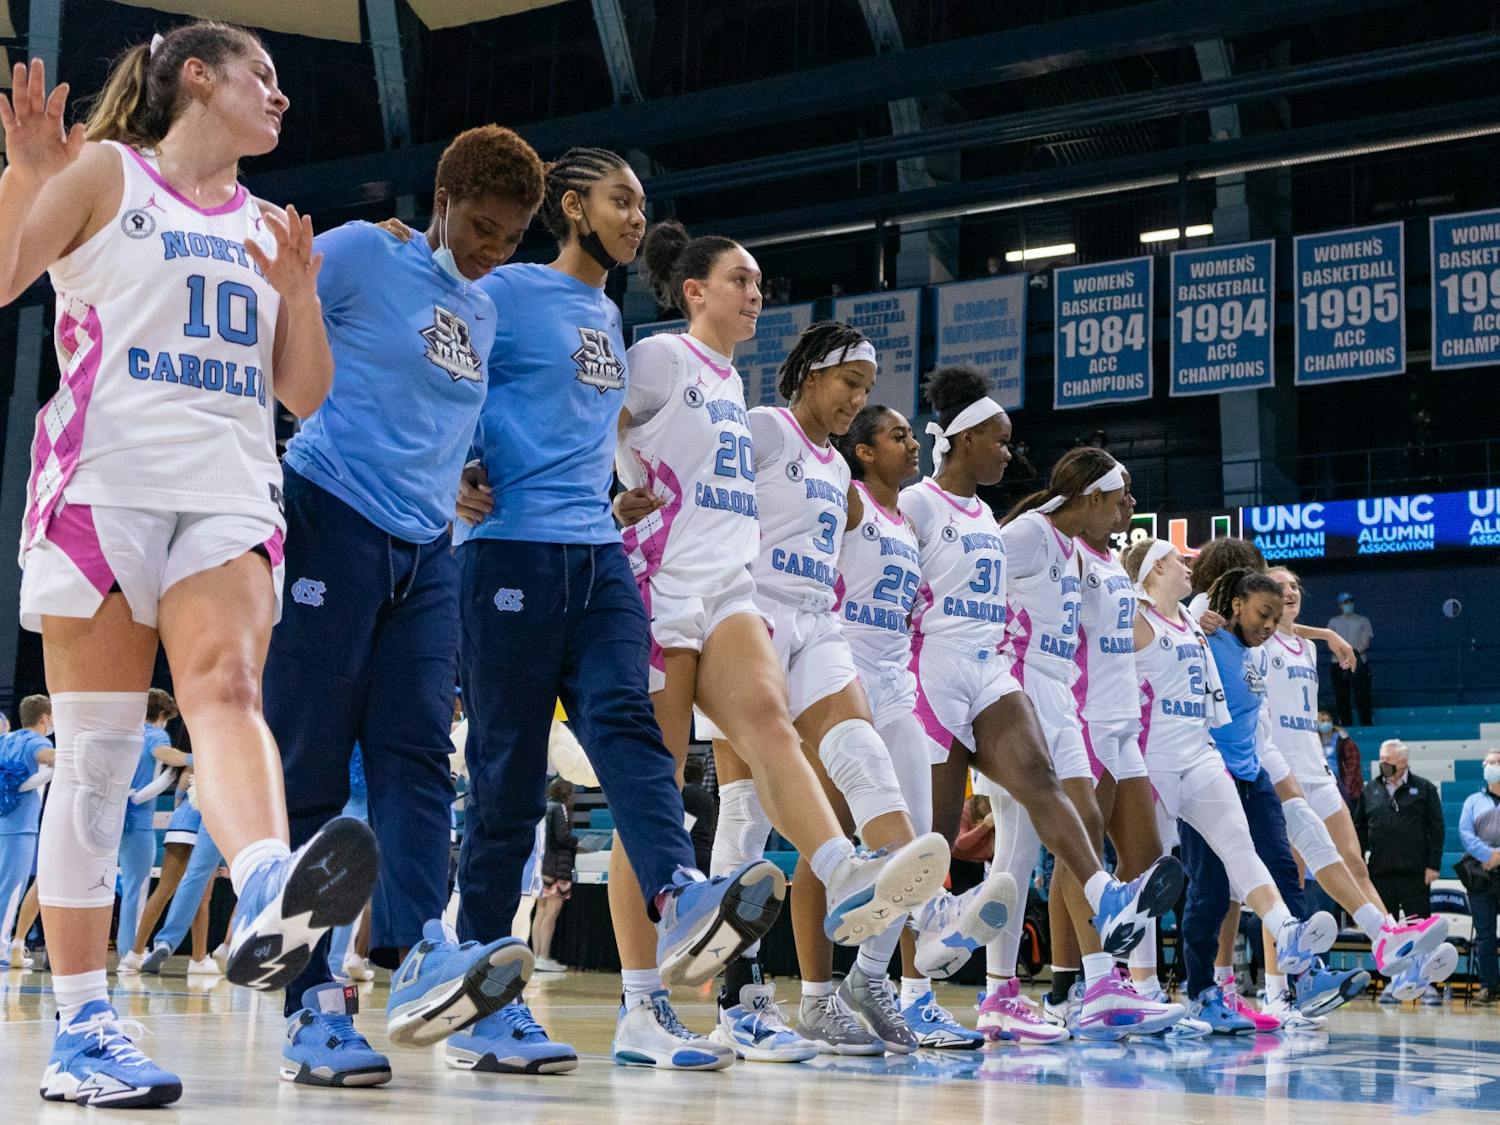 The women's basketball team sings the alma mater after the game against Miami on Feb. 6 in Carmichael Arena. The Heels won 85-38.